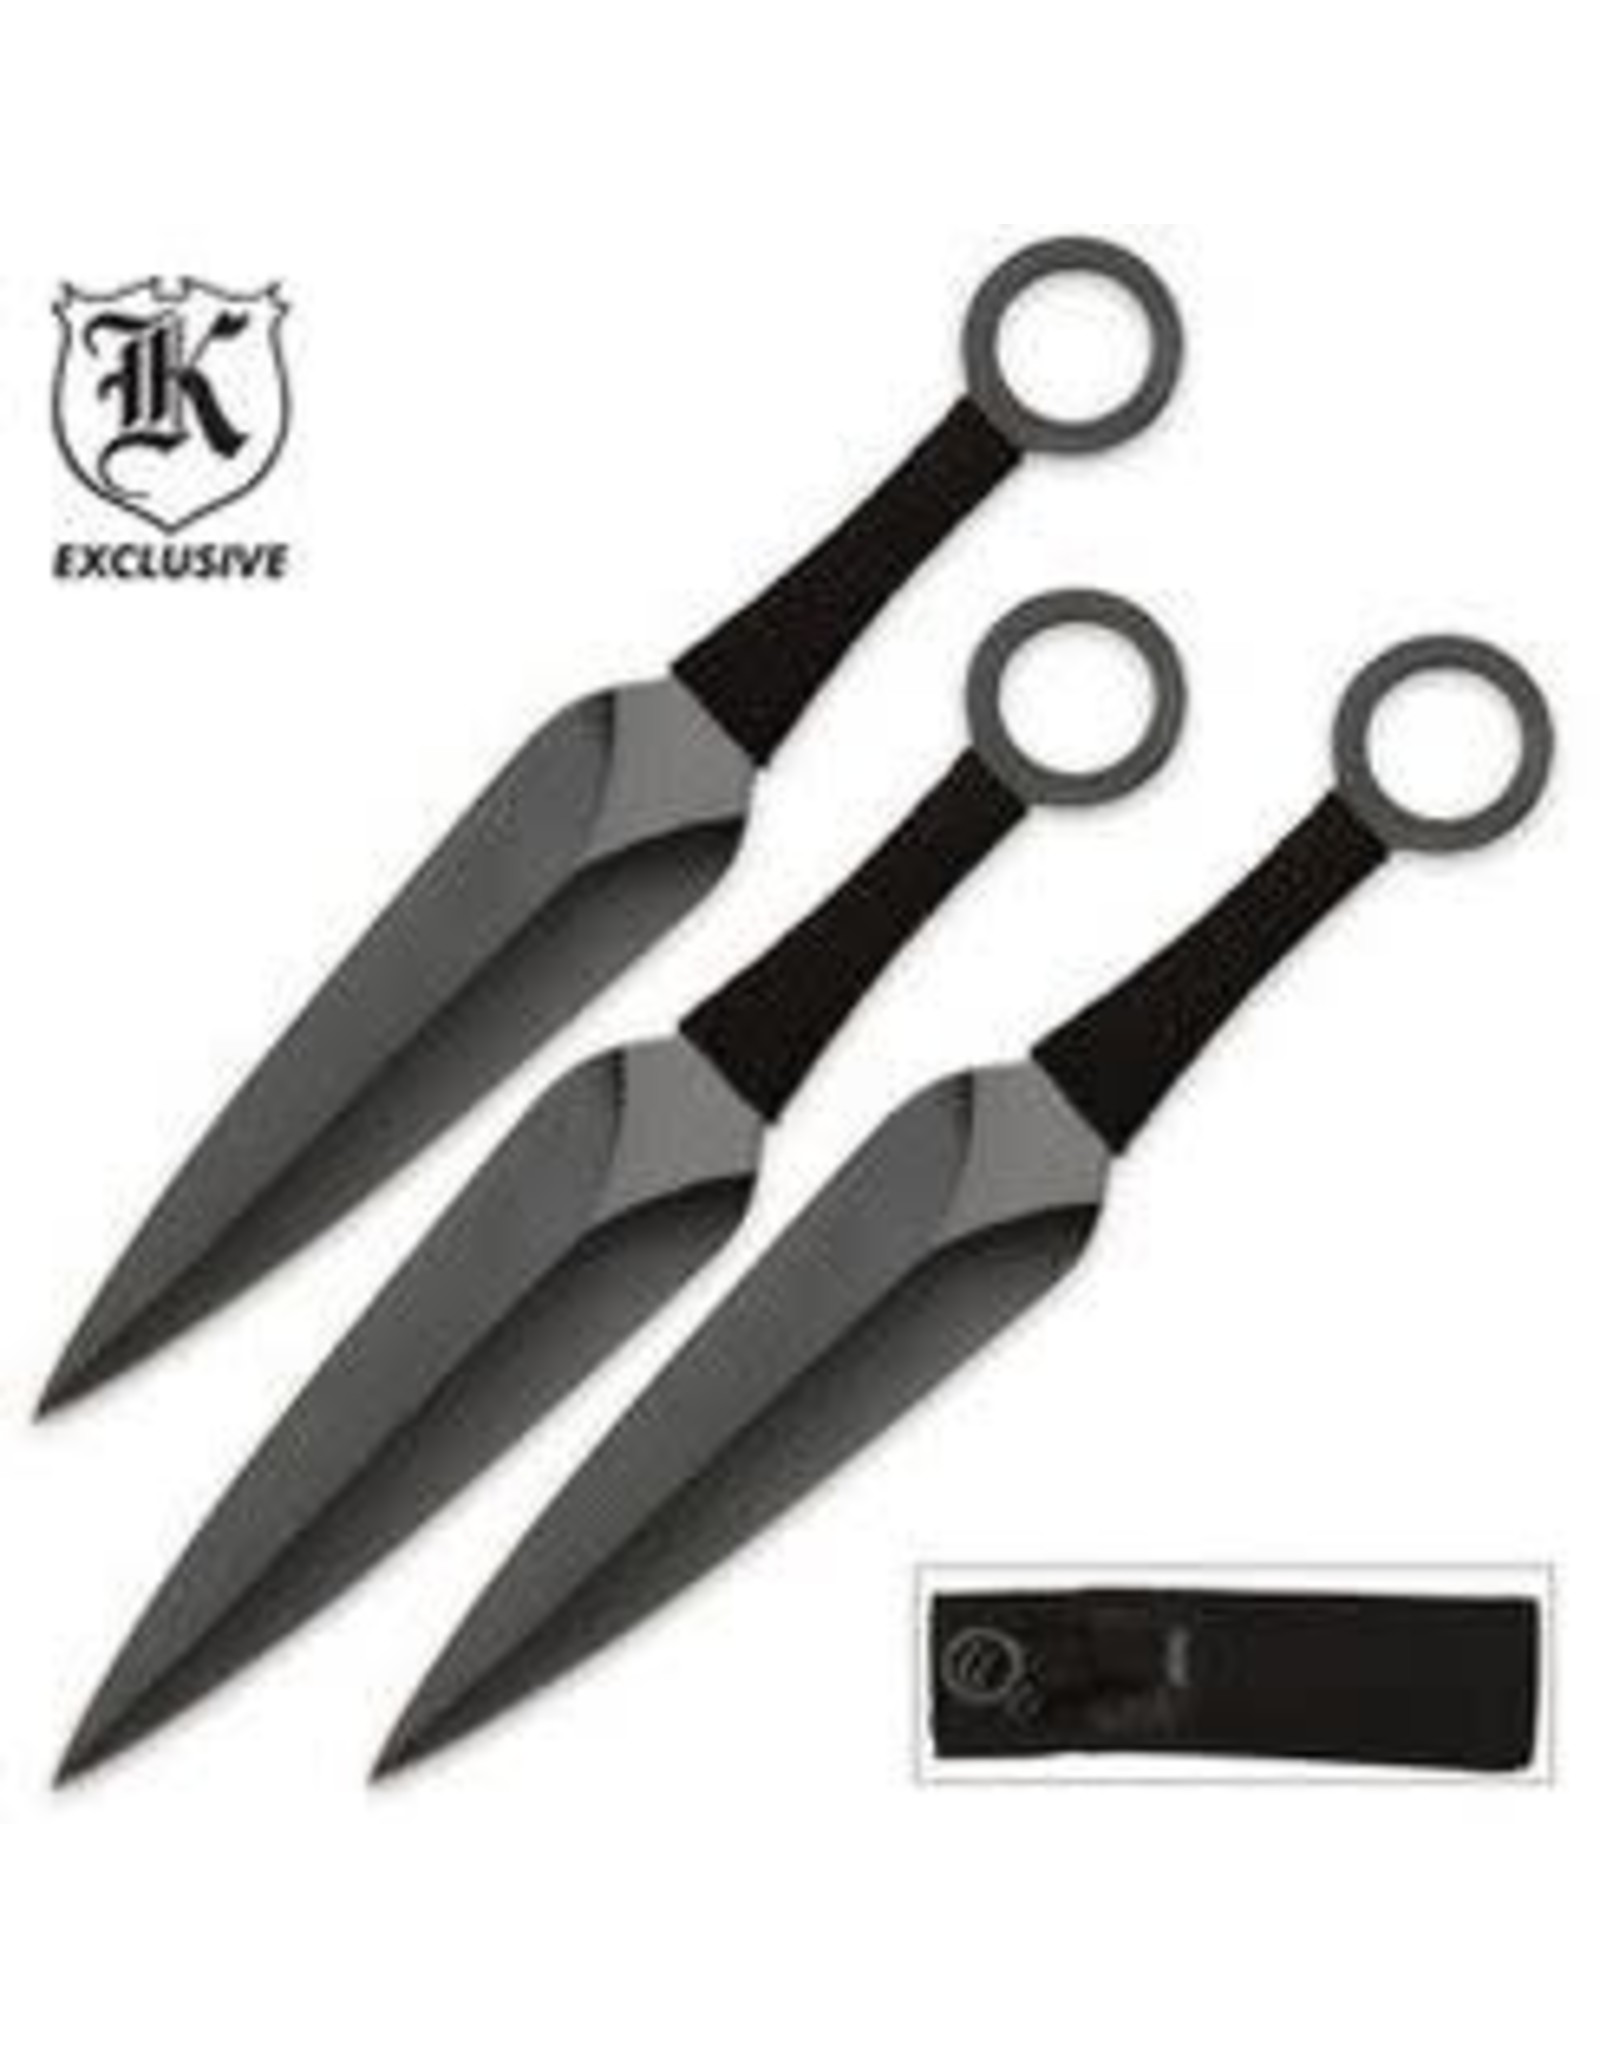 Triple Threat Kunai Thrower Knife Set with Sheath - Military Outlet